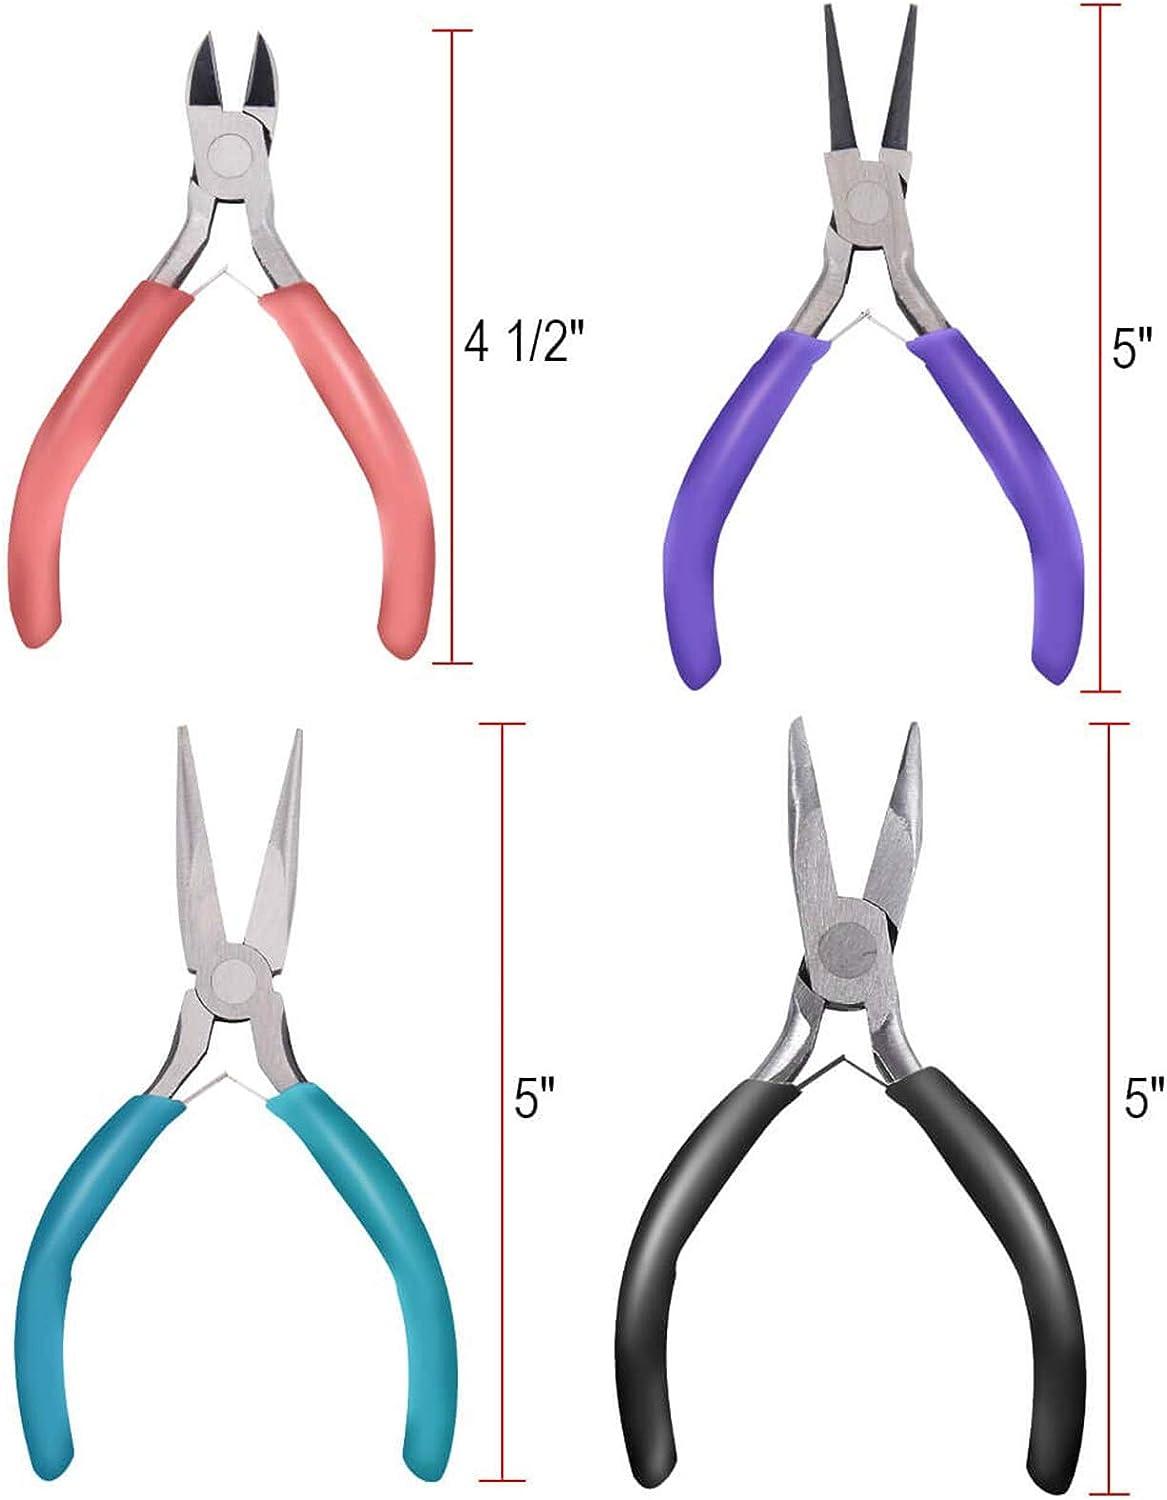  Anezus 4Pcs Jewelry Pliers Tool Set Includes Needle